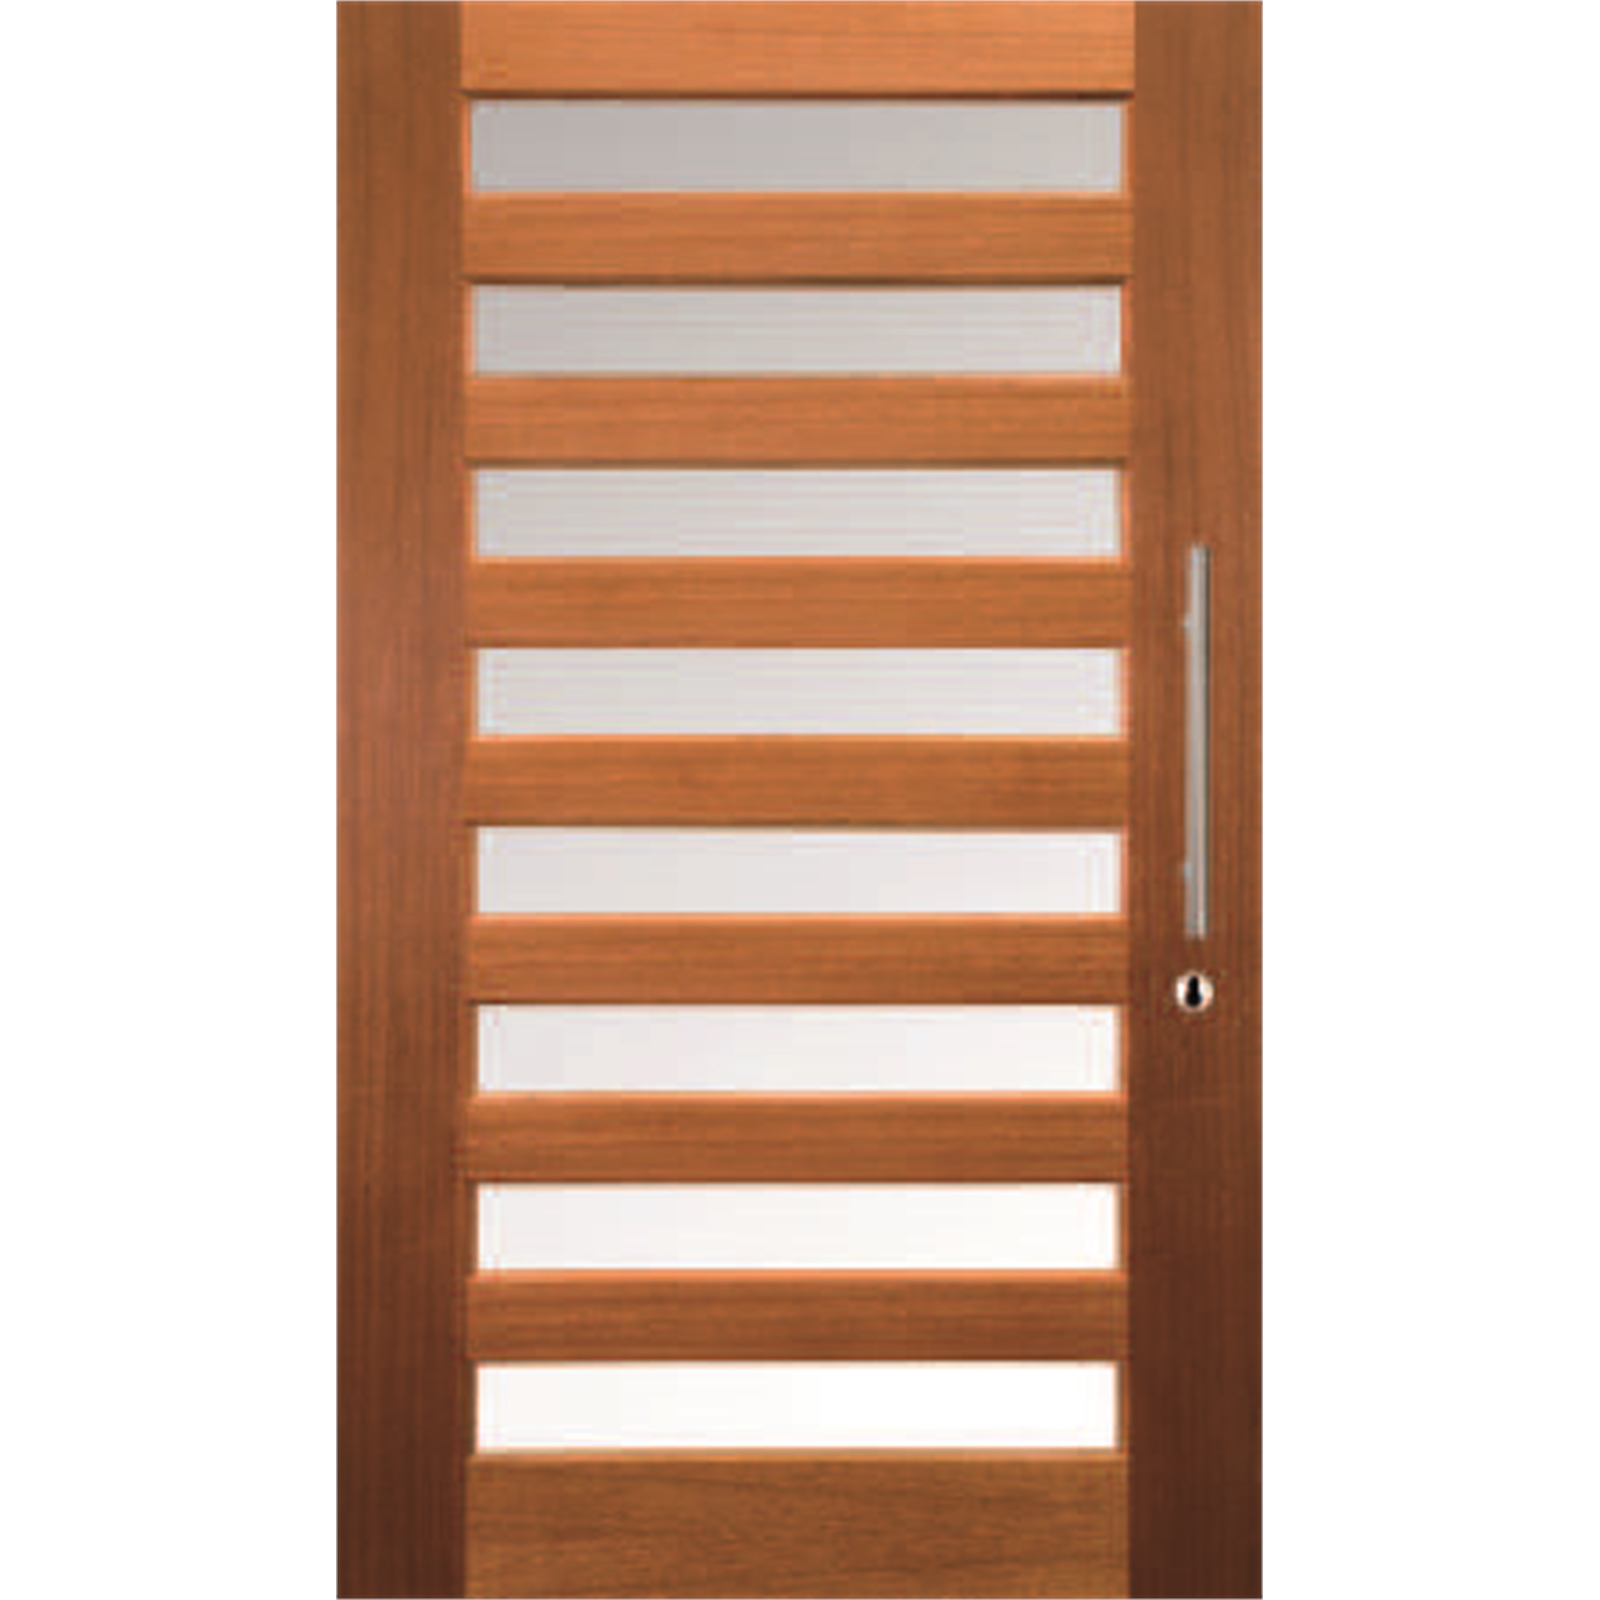 Hume  2040 x 1200 x 40mm Savoy Entrance Door G1 Clear Glass XS28